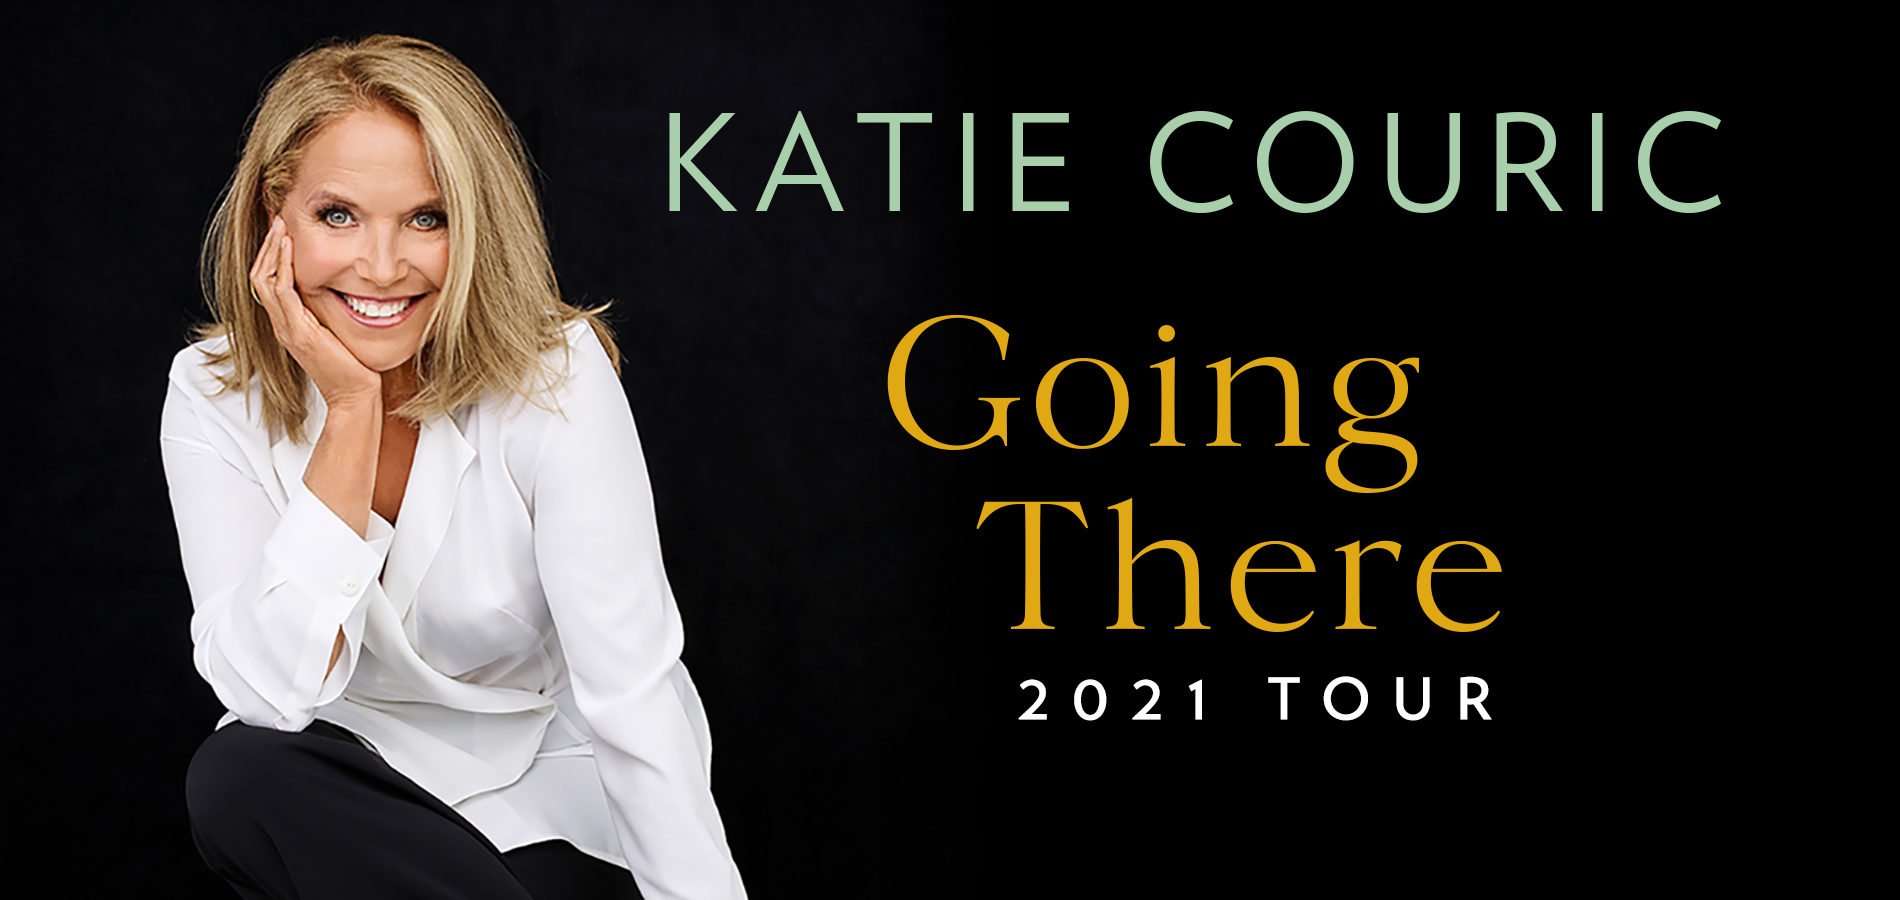 Katie Couric: “Going There” Live